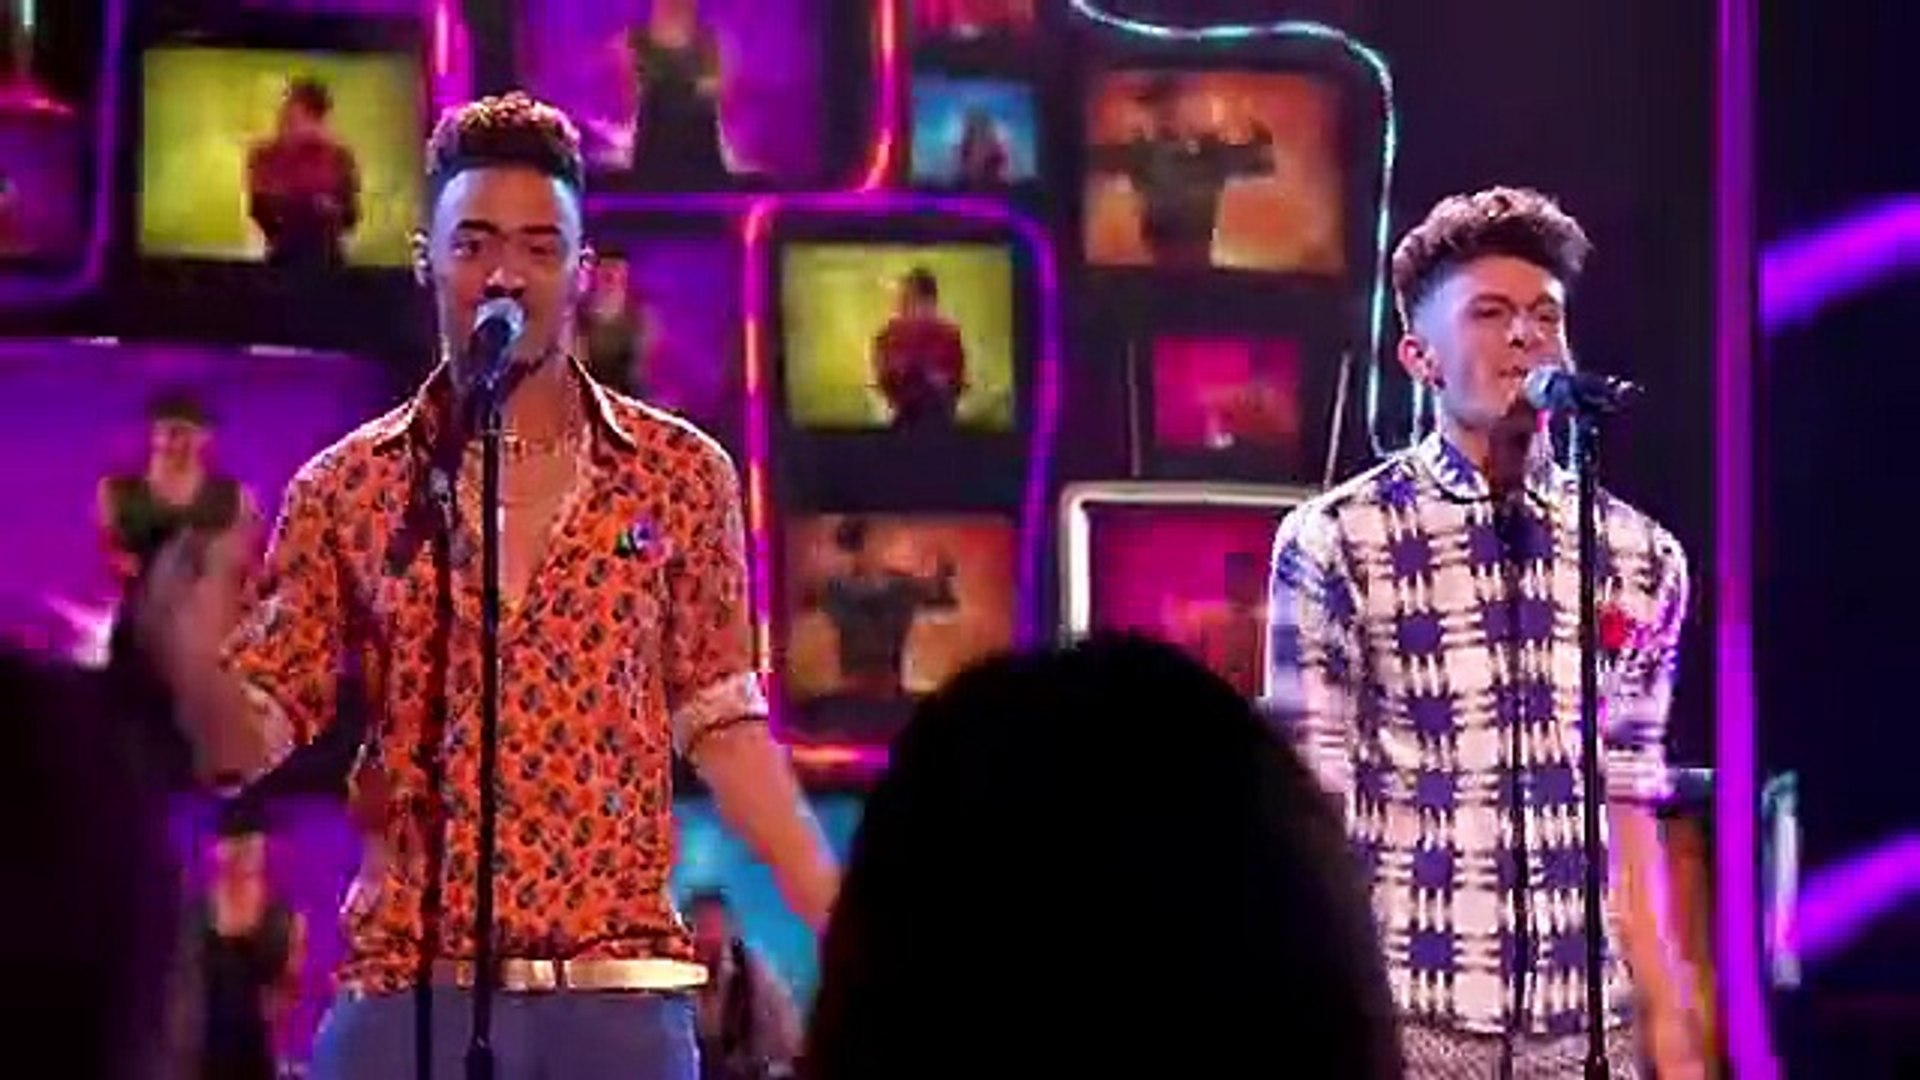 Kingsland Road sing Blame It On The Boogie - Live Week 4 - The X Factor 2013 - OFFICIAL CHANNEL